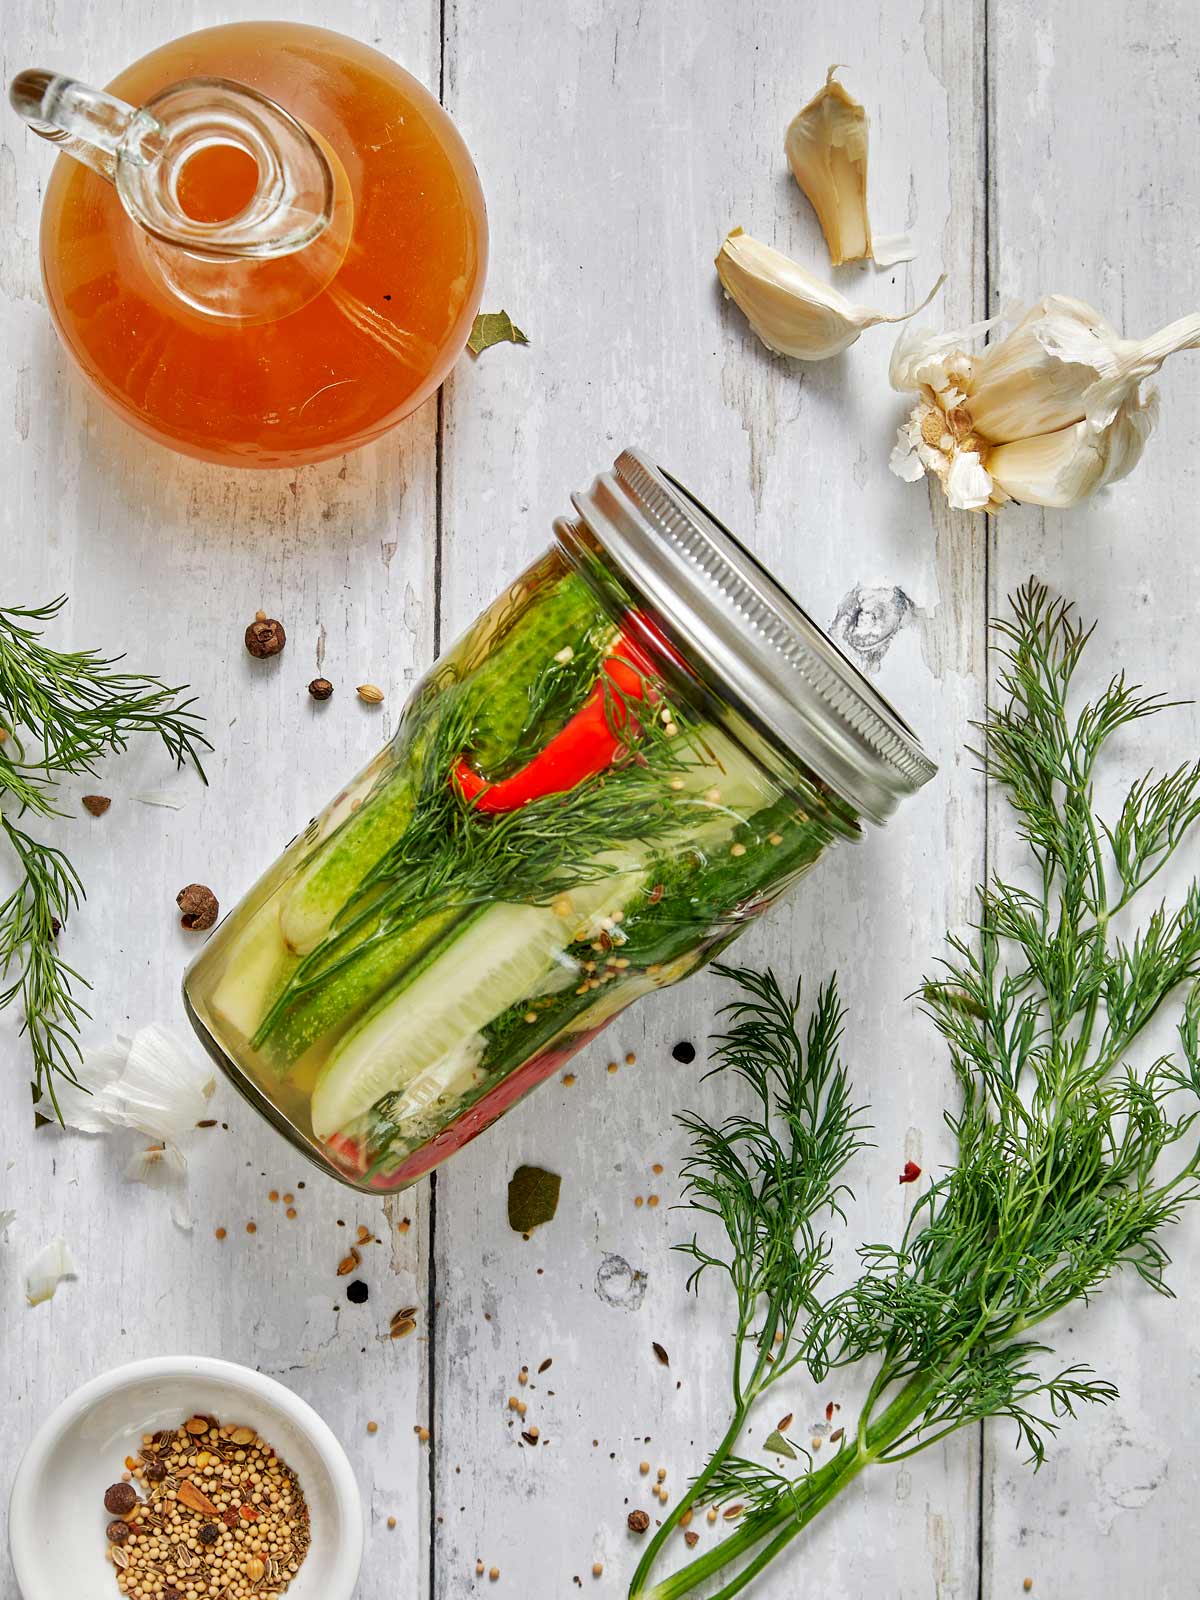 Glass jar of pickles lying on its side.